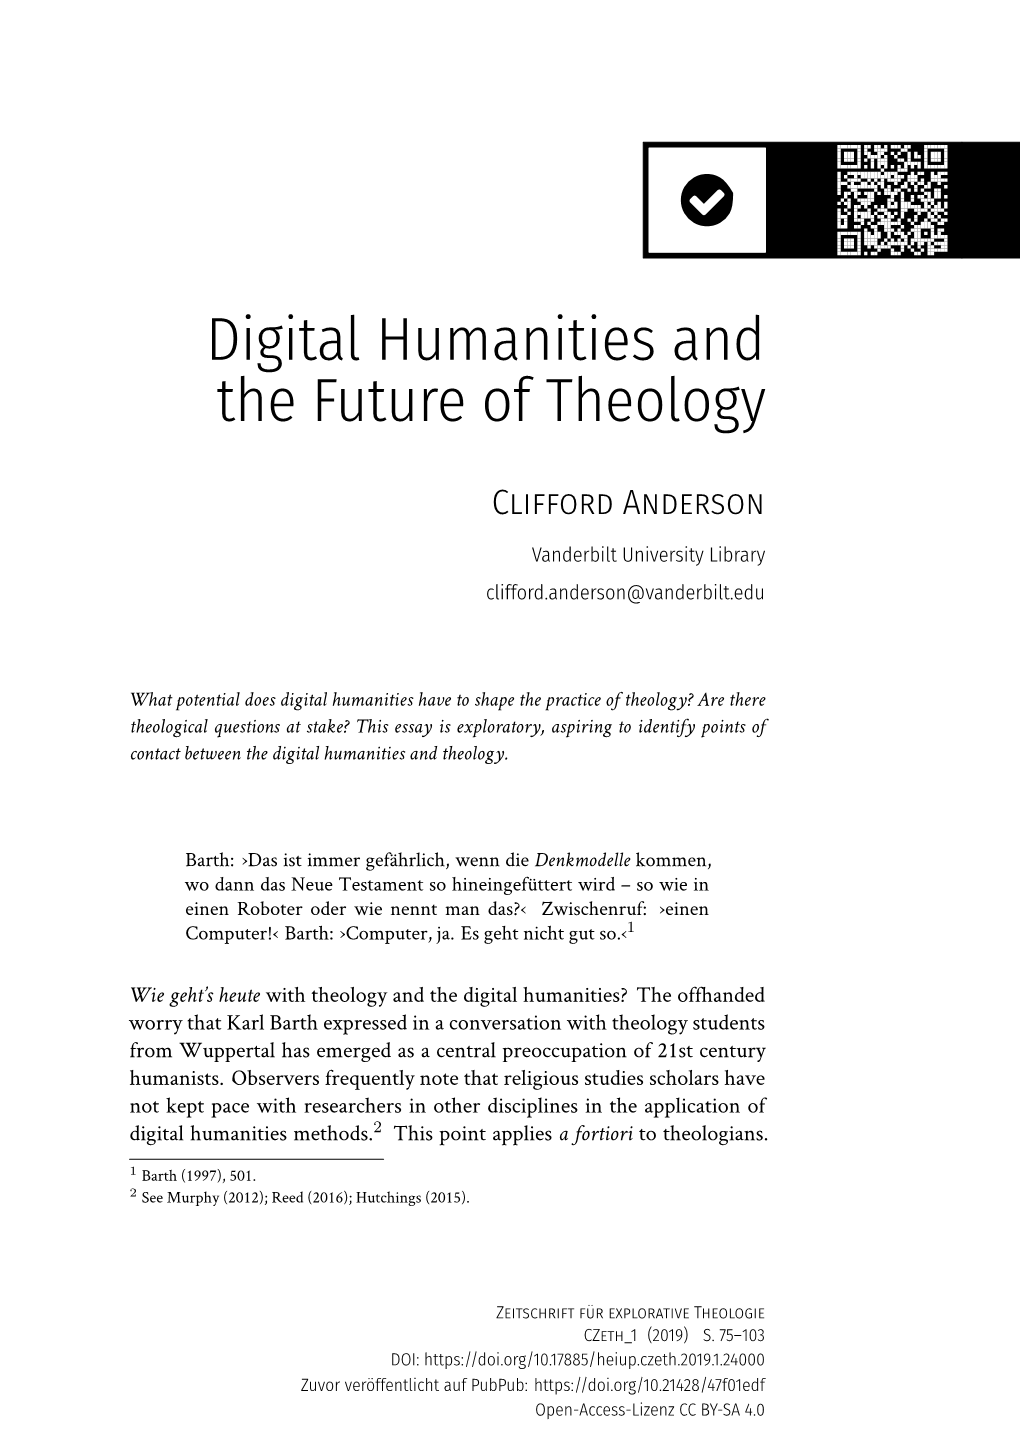 Digital Humanities and the Future of Theology